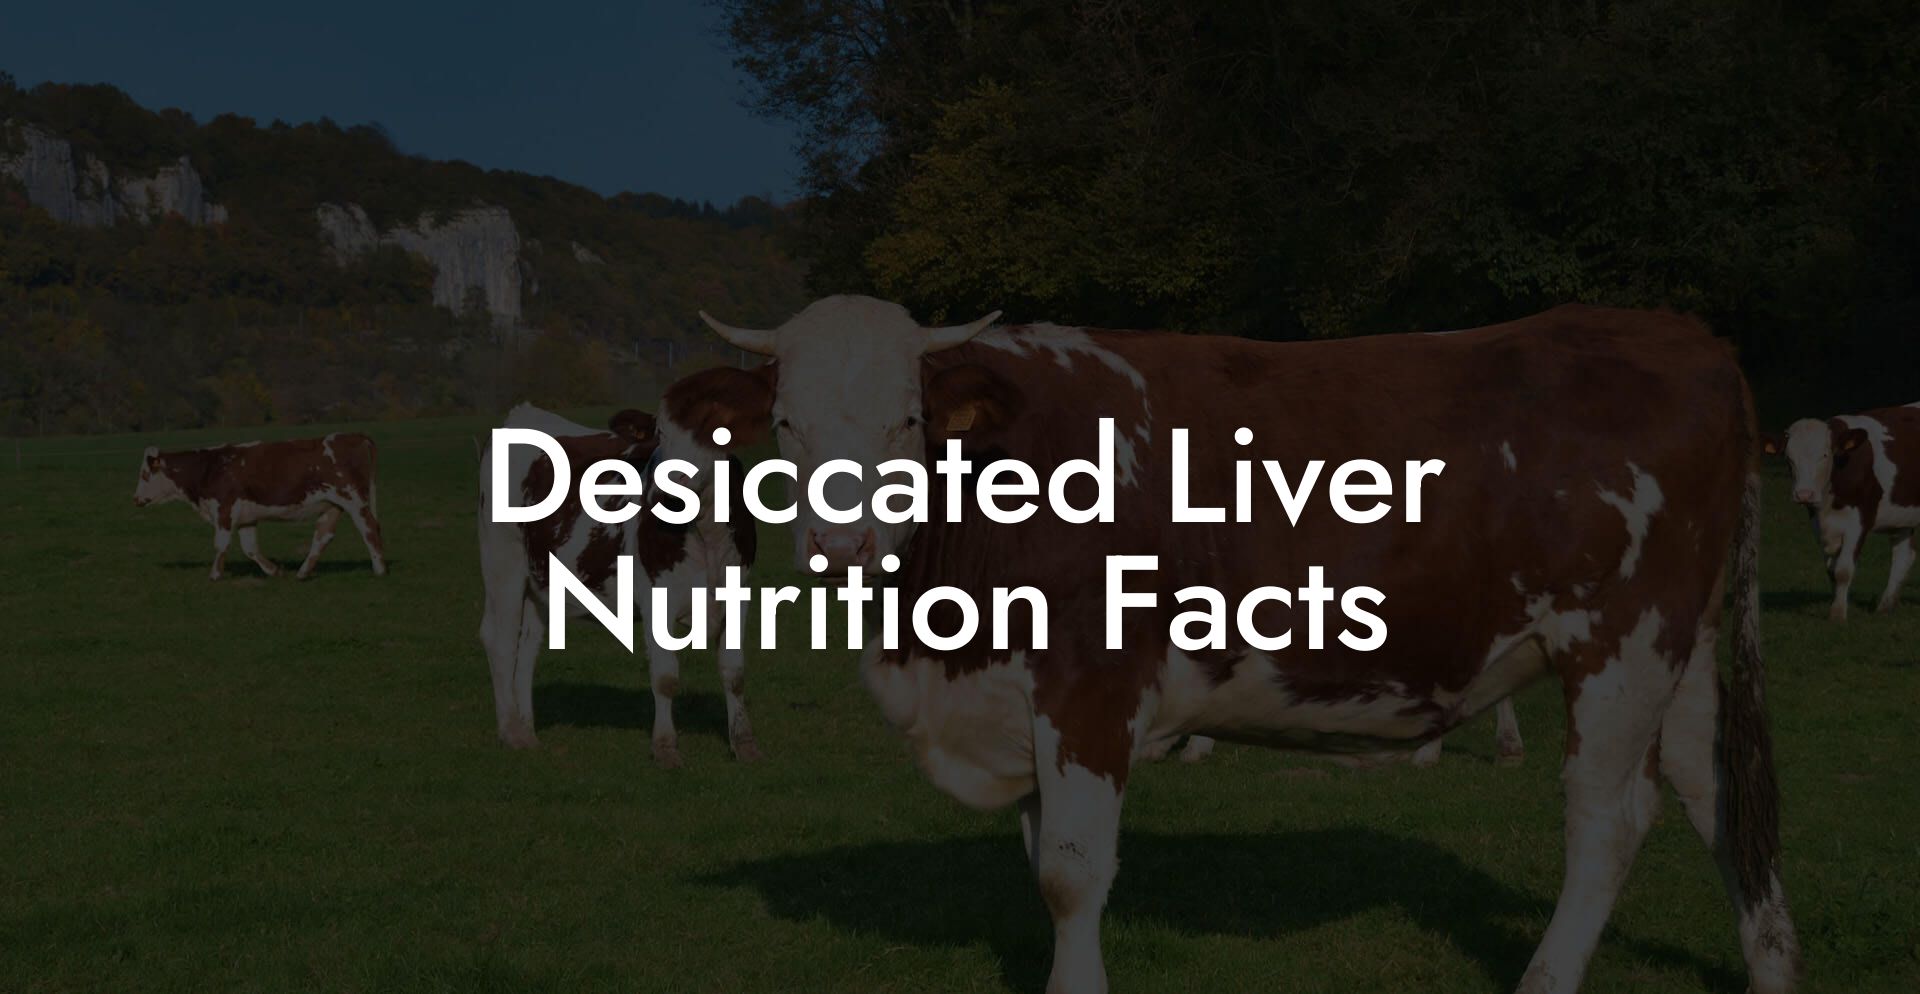 Desiccated Liver Nutrition Facts